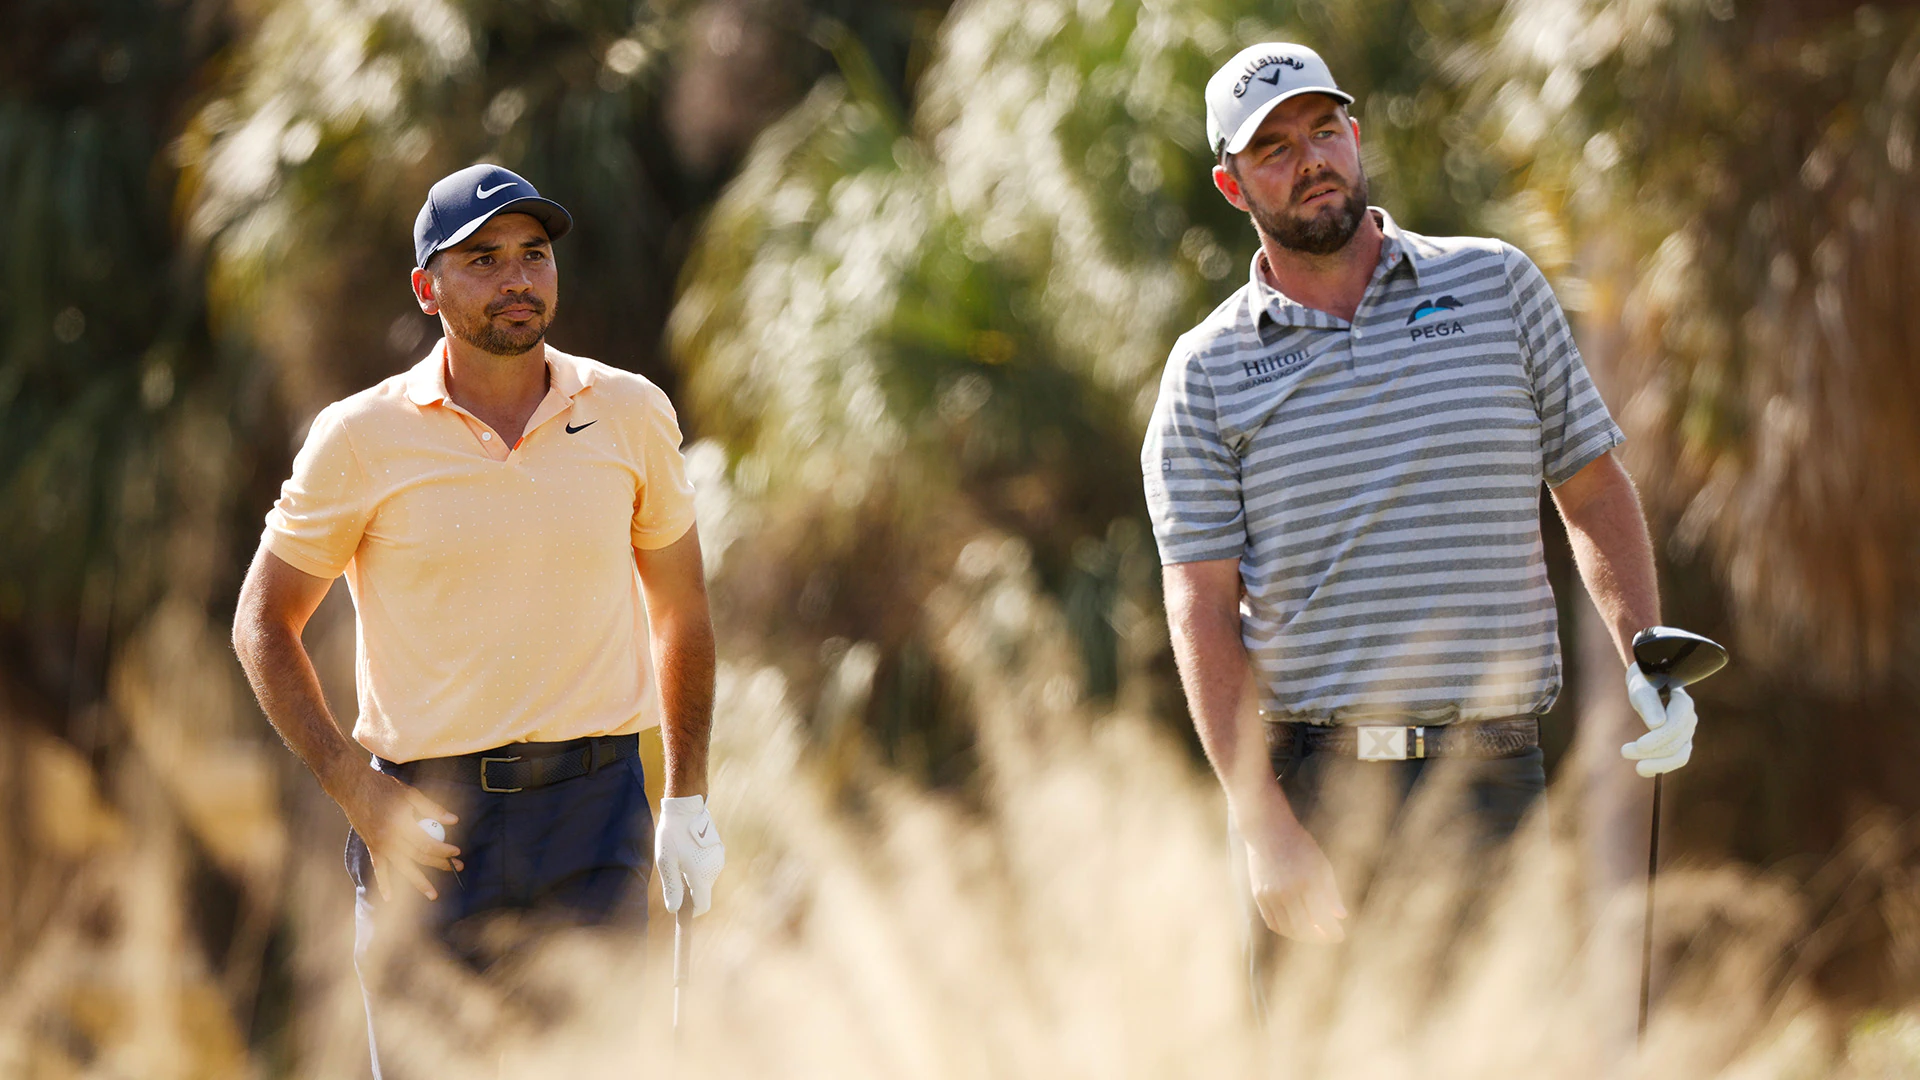 Jason Day and Marc Leishman nearly set record at QBE Shootout; have Rd. 1 lead